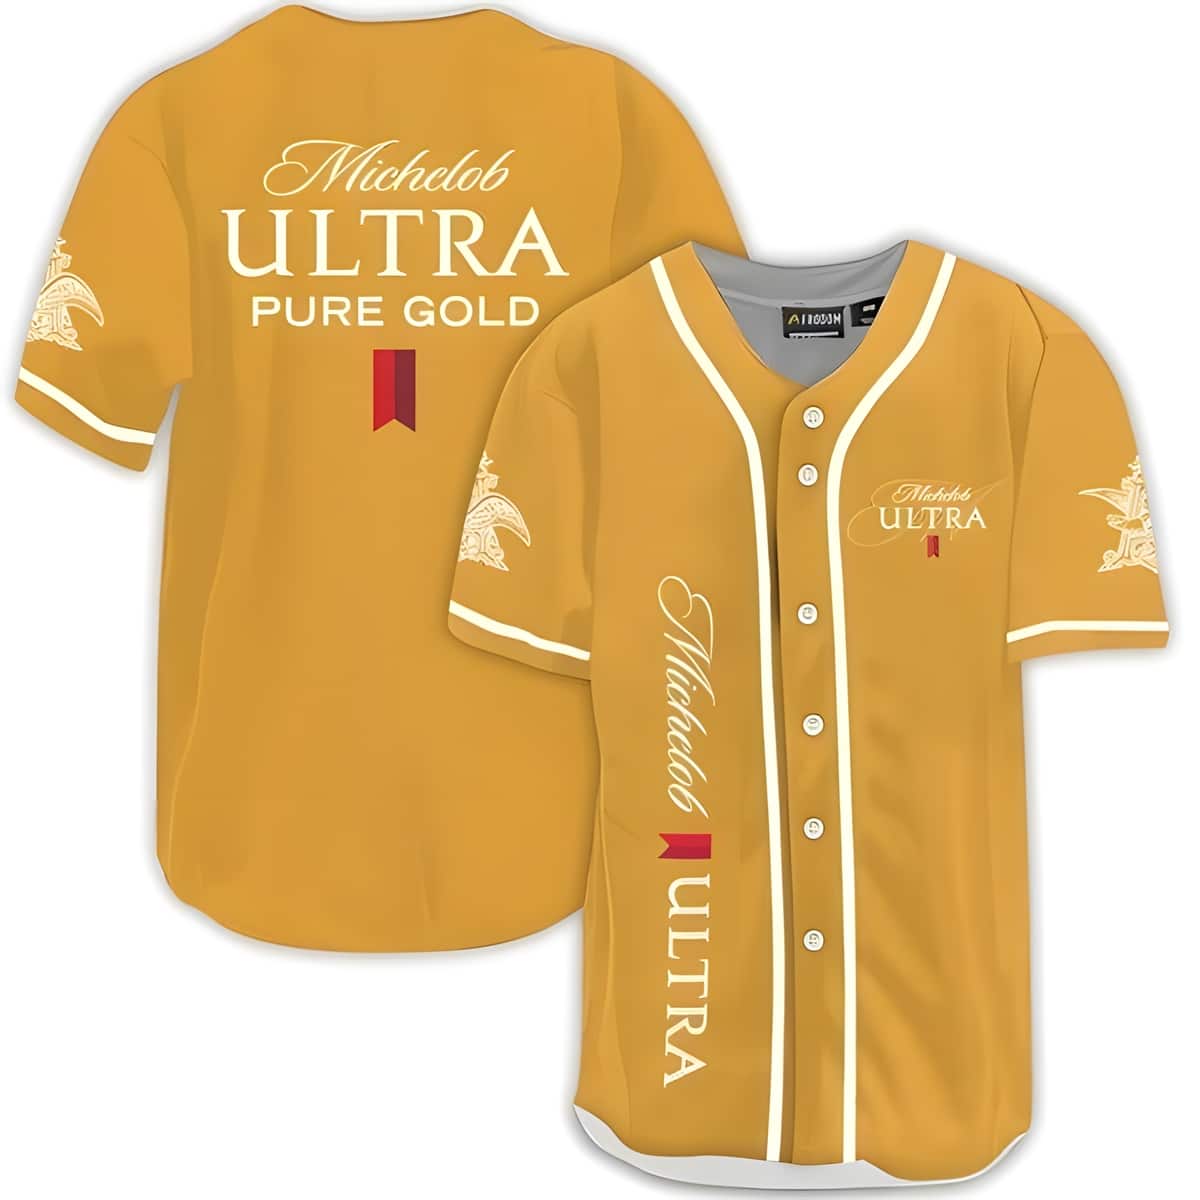 Michelob ULTRA Baseball Jersey Pure Gold Gift For Sports Fans